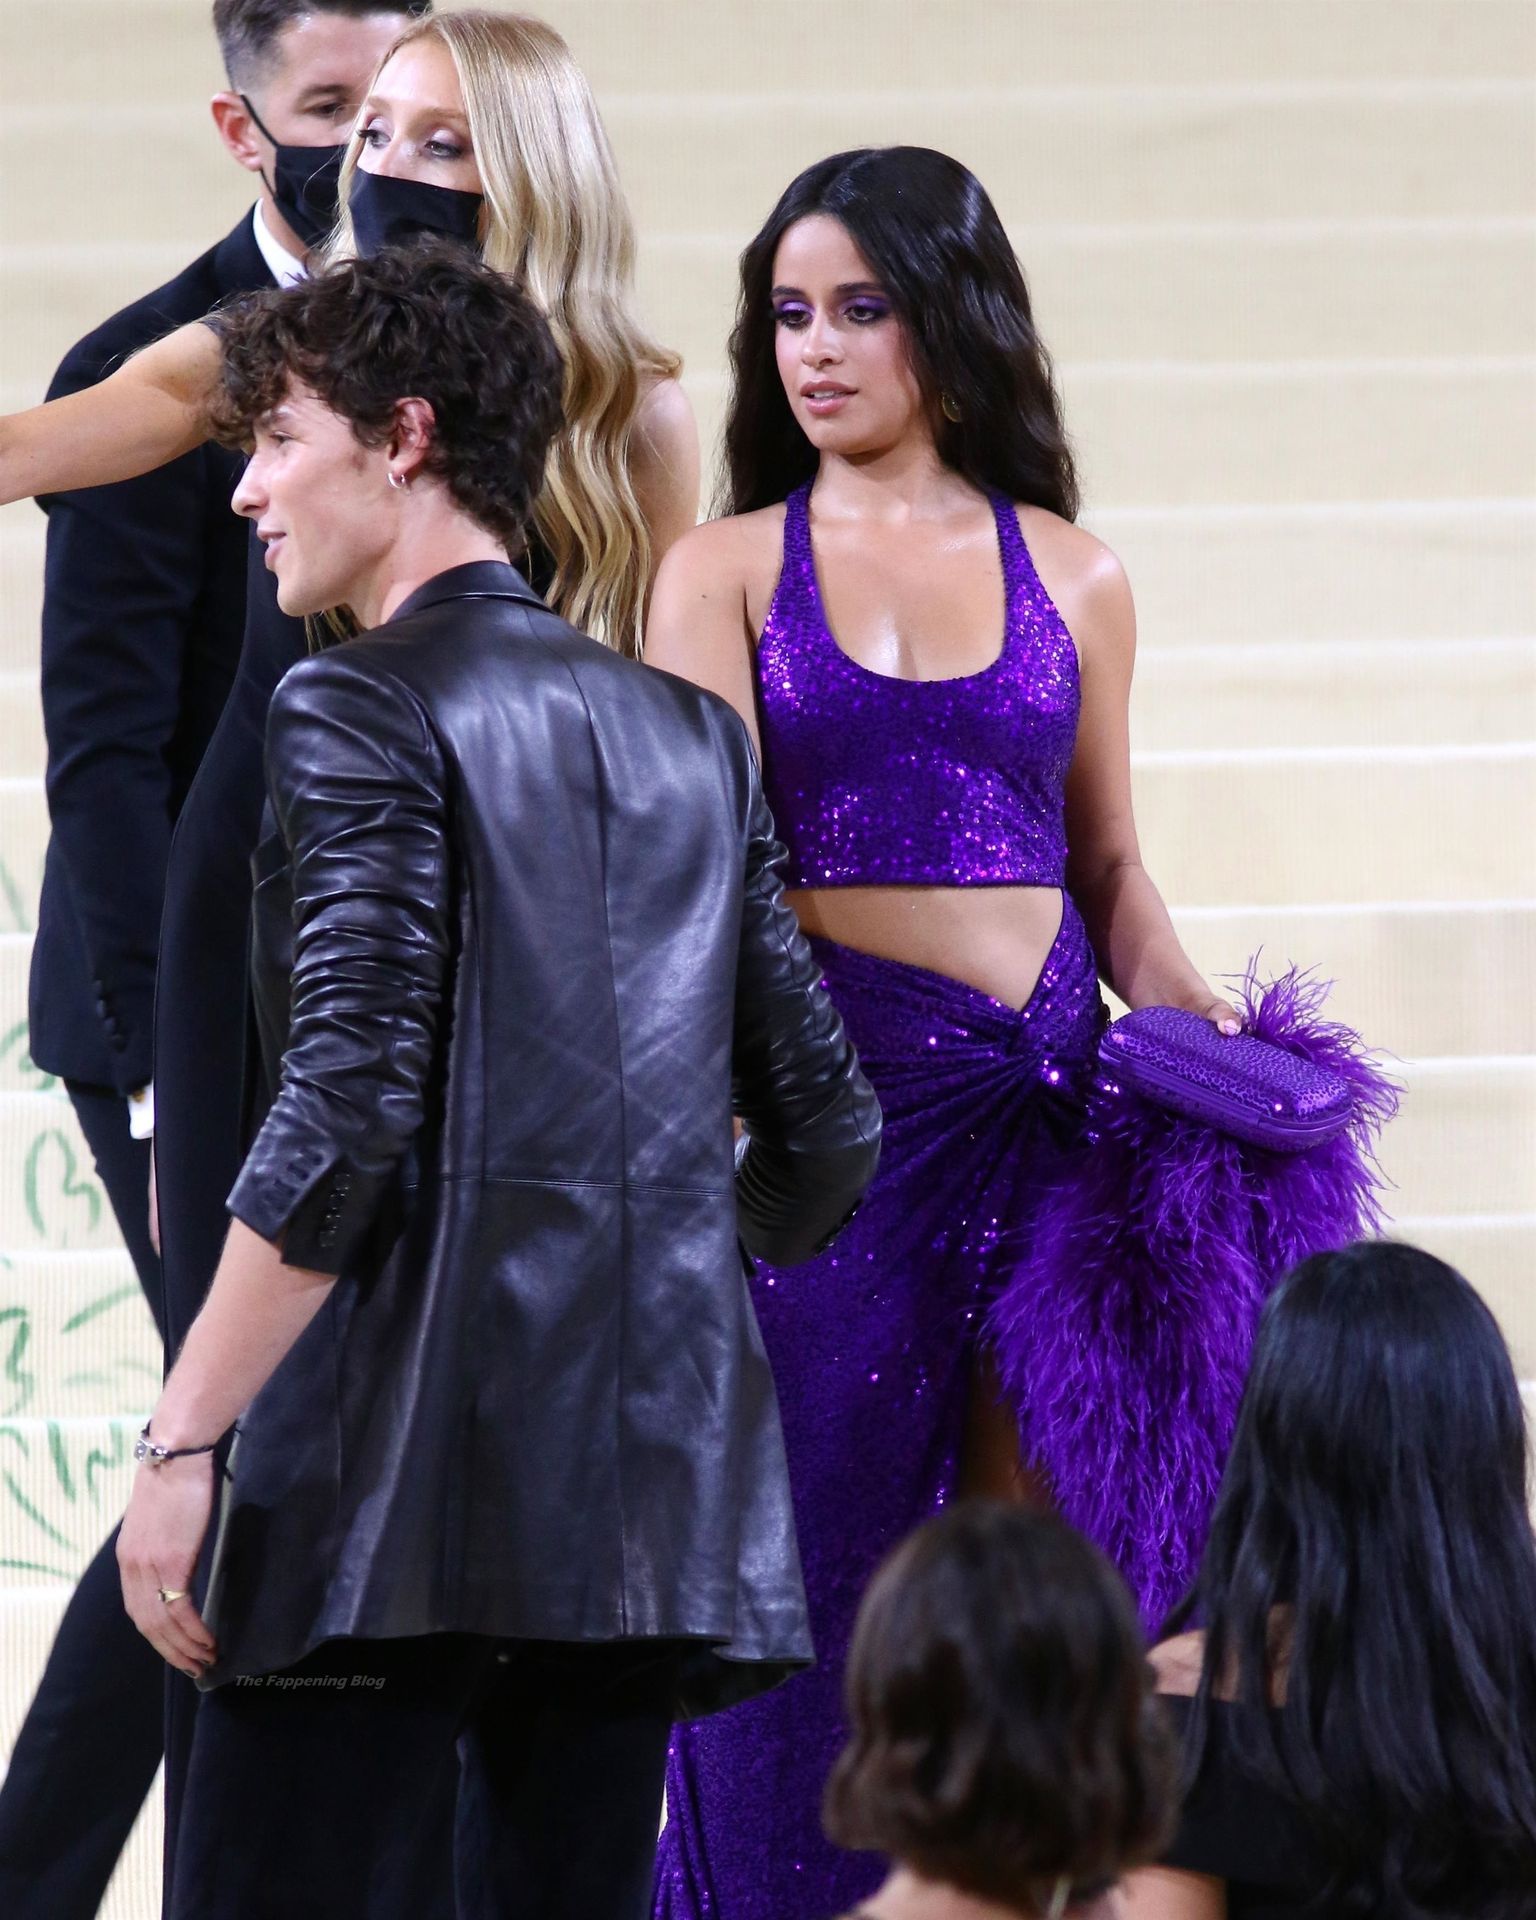 Shawn M
endes & Camila Cabello Arrive at the 2021 Met Gala in NYC (62 Photos)